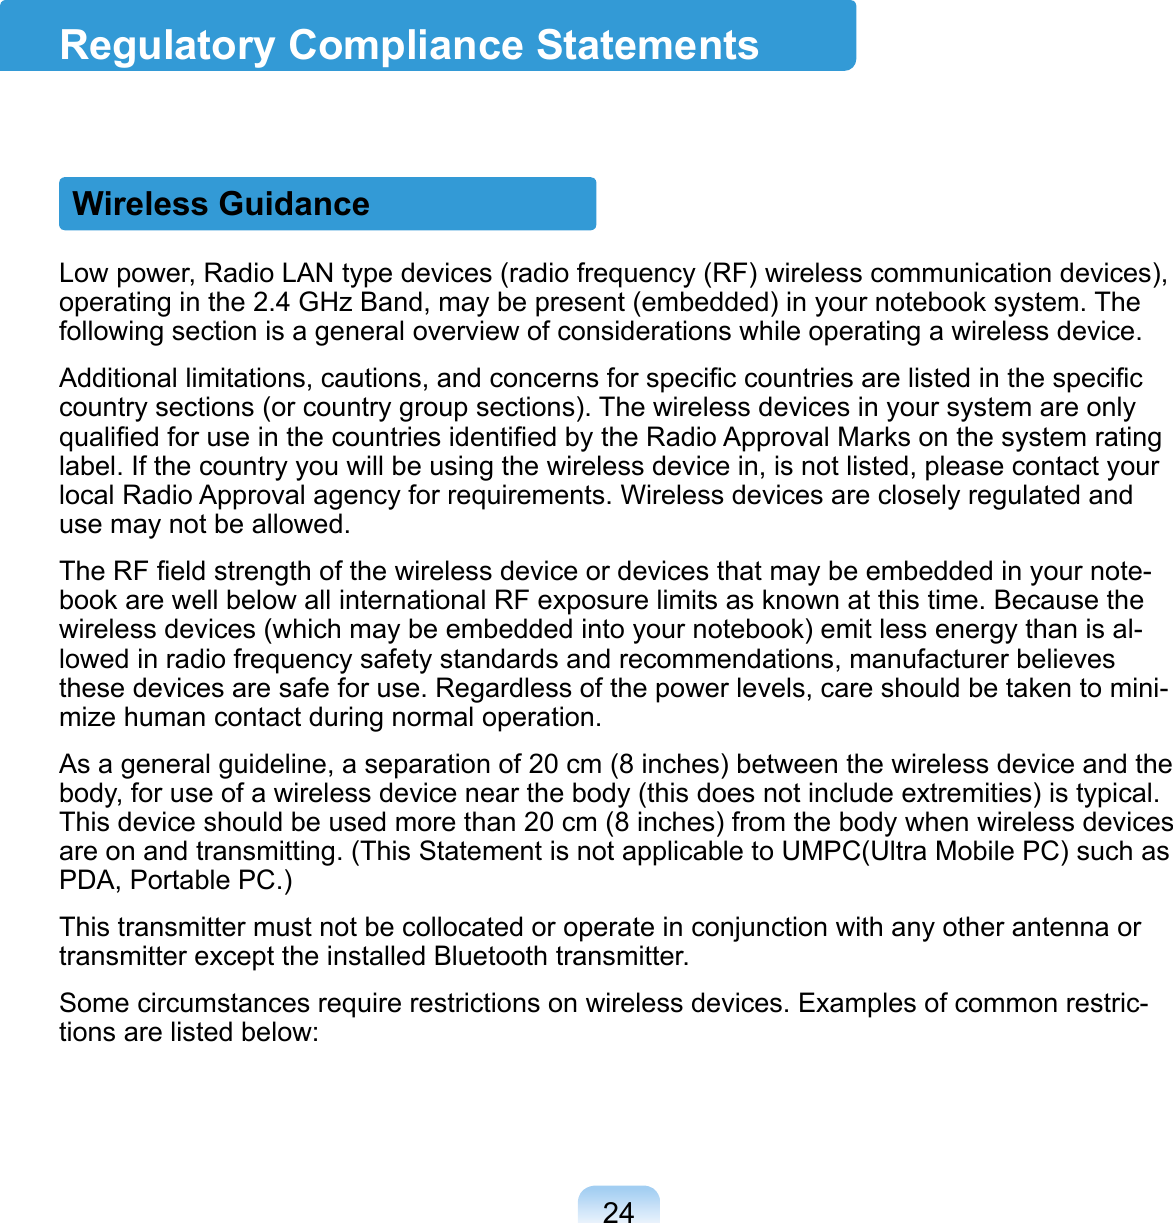 24Regulatory Compliance StatementsWireless GuidanceLow power, Radio LAN type devices (radio frequency (RF) wireless communication devices), operating in the 2.4 GHz Band, may be present (embedded) in your notebook system. The following section is a general overview of considerations while operating a wireless device.Additional limitations, cautions, and concerns for speciﬁc countries are listed in the speciﬁc country sections (or country group sections). The wireless devices in your system are only qualiﬁed for use in the countries identiﬁed by the Radio Approval Marks on the system rating label. If the country you will be using the wireless device in, is not listed, please contact your local Radio Approval agency for requirements. Wireless devices are closely regulated and use may not be allowed.The RF ﬁeld strength of the wireless device or devices that may be embedded in your note-book are well below all international RF exposure limits as known at this time. Because the wireless devices (which may be embedded into your notebook) emit less energy than is al-lowed in radio frequency safety standards and recommendations, manufacturer believes these devices are safe for use. Regardless of the power levels, care should be taken to mini-mize human contact during normal operation.As a general guideline, a separation of 20 cm (8 inches) between the wireless device and the body, for use of a wireless device near the body (this does not include extremities) is typical. This device should be used more than 20 cm (8 inches) from the body when wireless devices are on and transmitting. (This Statement is not applicable to UMPC(Ultra Mobile PC) such as PDA, Portable PC.)This transmitter must not be collocated or operate in conjunction with any other antenna or transmitter except the installed Bluetooth transmitter.Some circumstances require restrictions on wireless devices. Examples of common restric-tions are listed below: